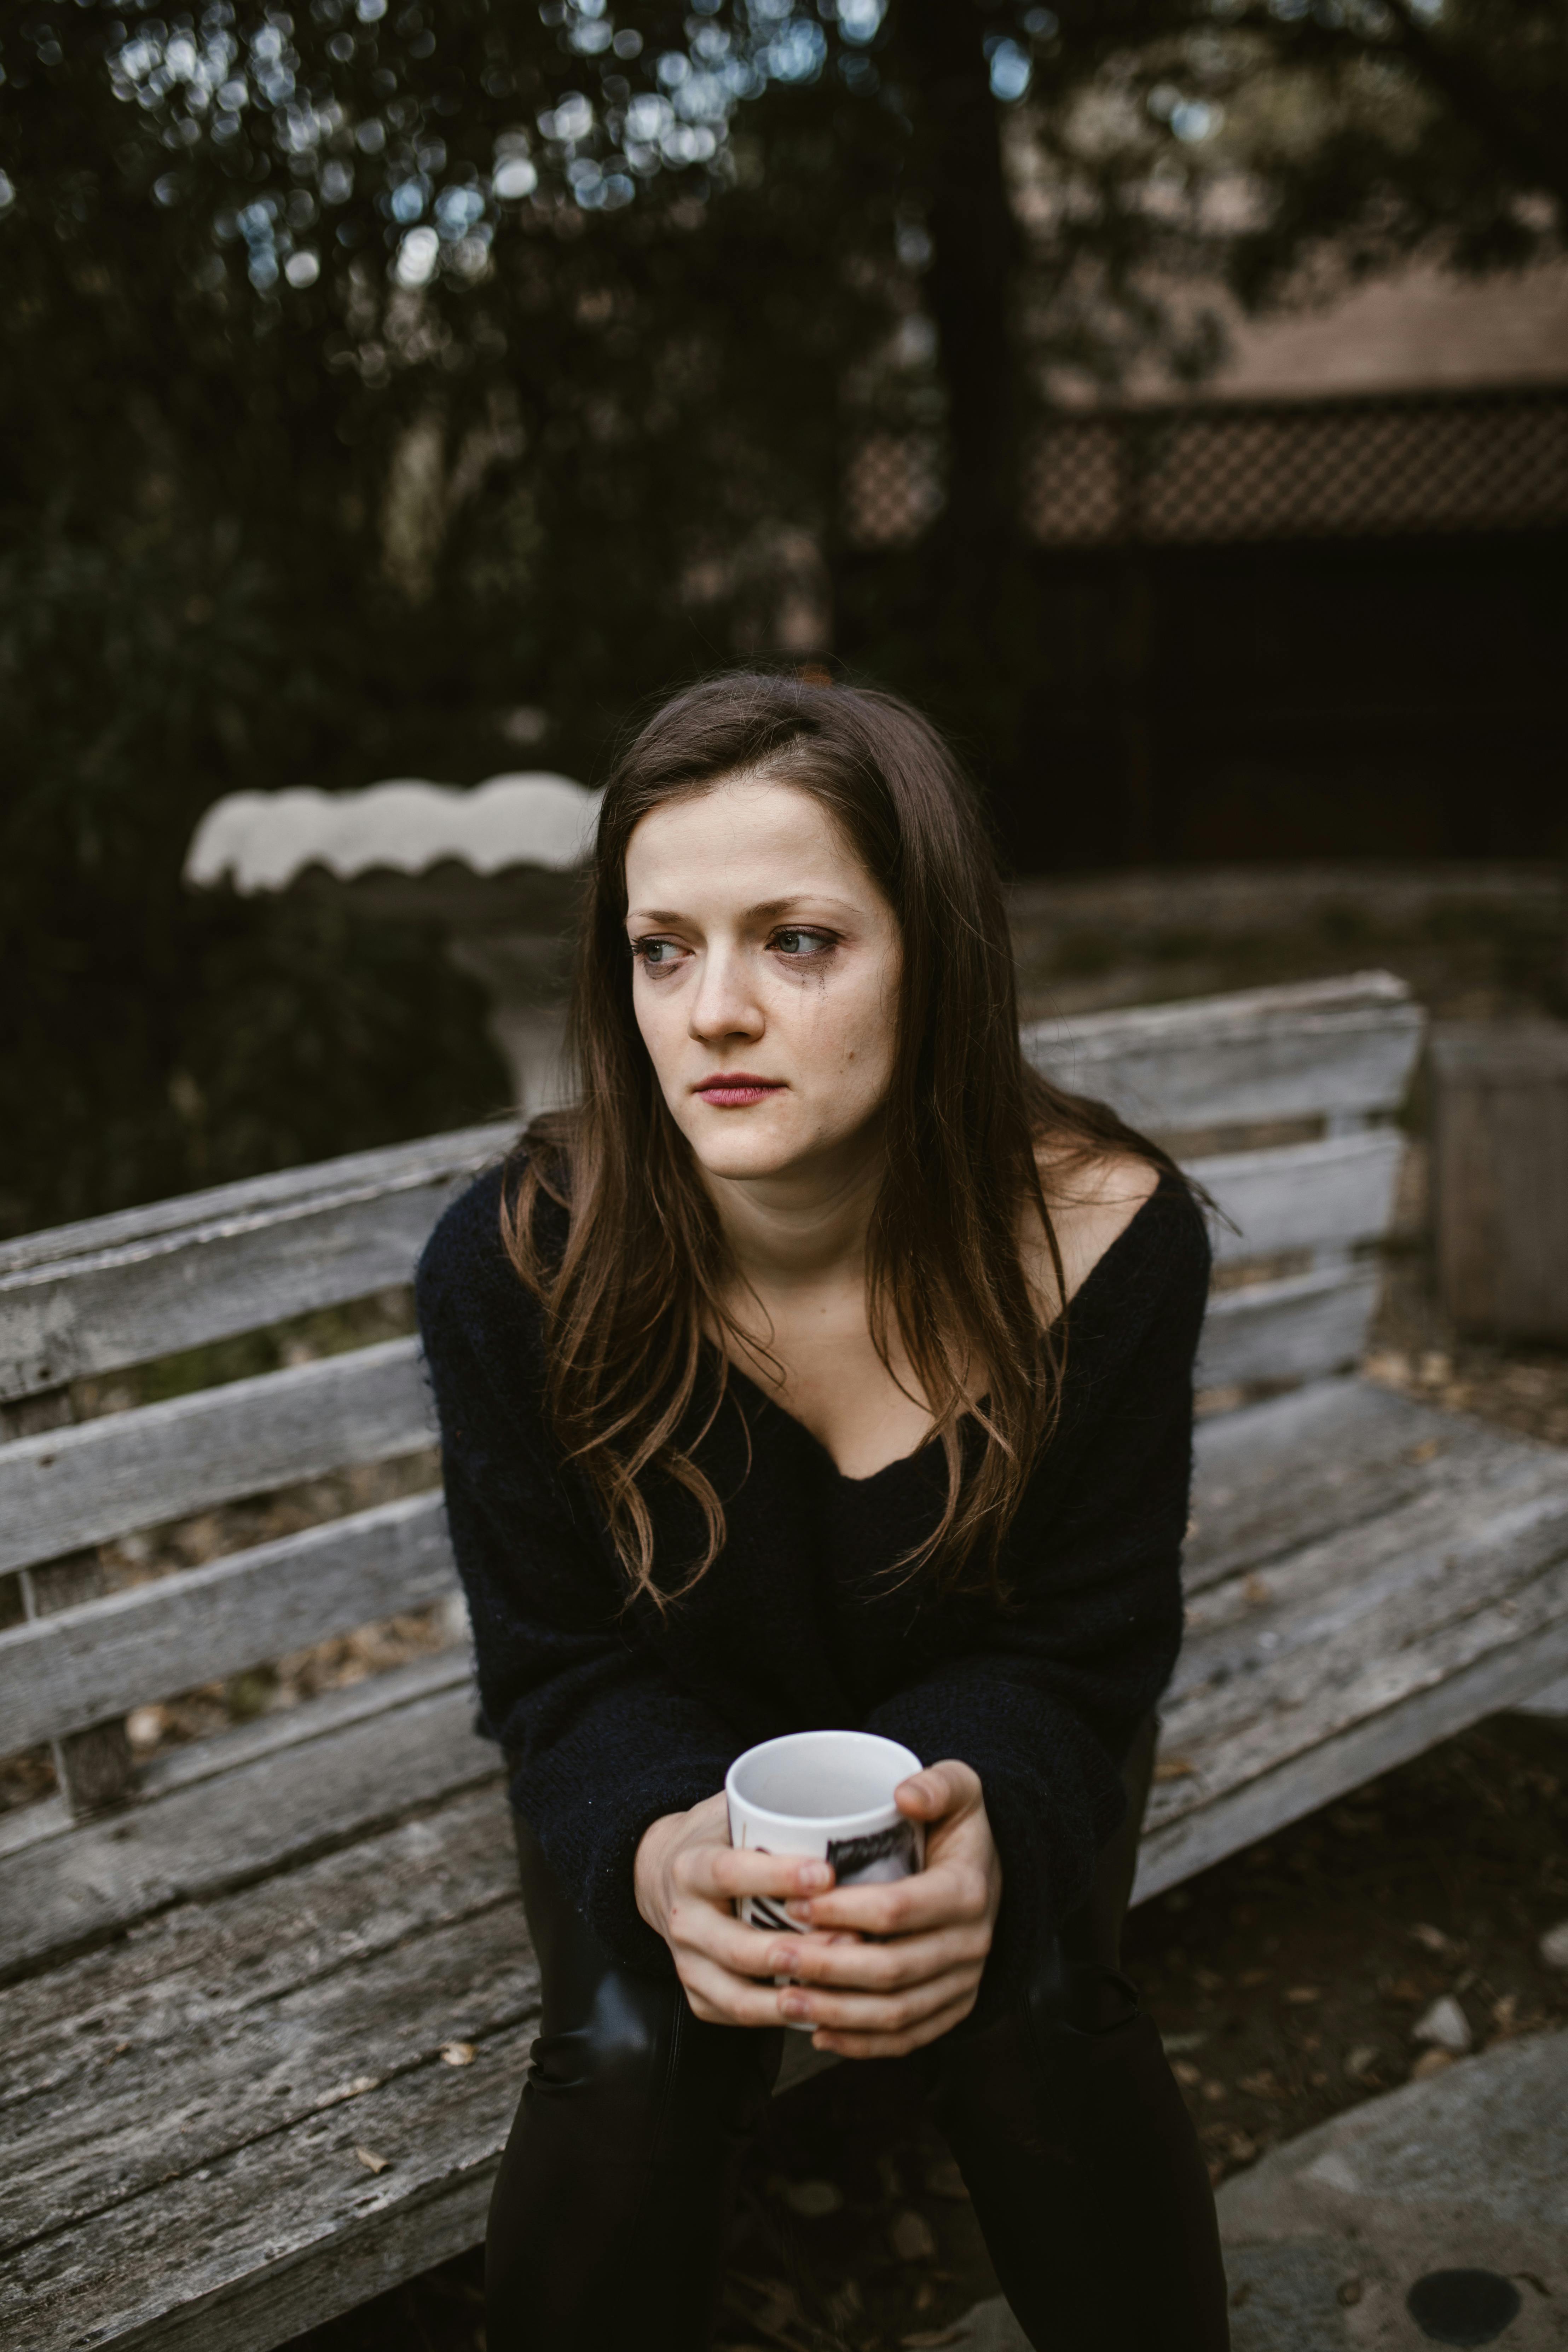 Woman crying in the park | Source: Pexels